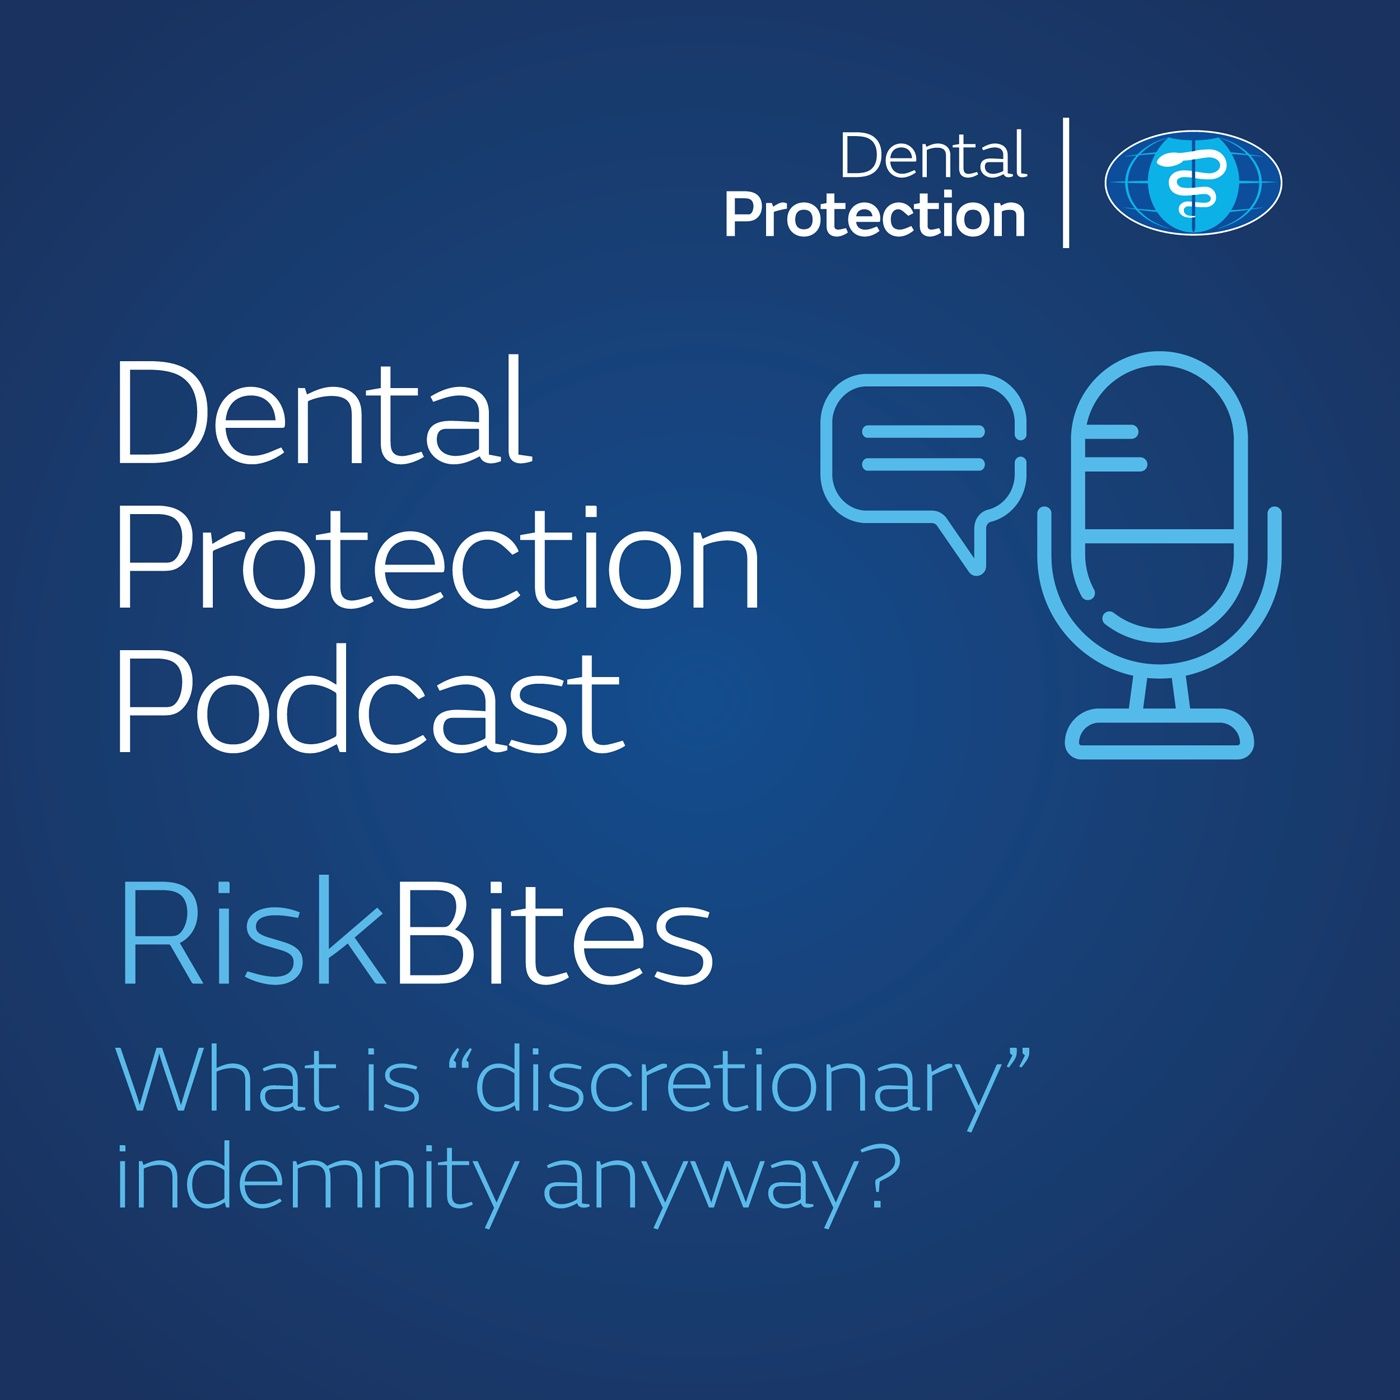 RiskBites: What is ‘discretionary’ indemnity anyway?